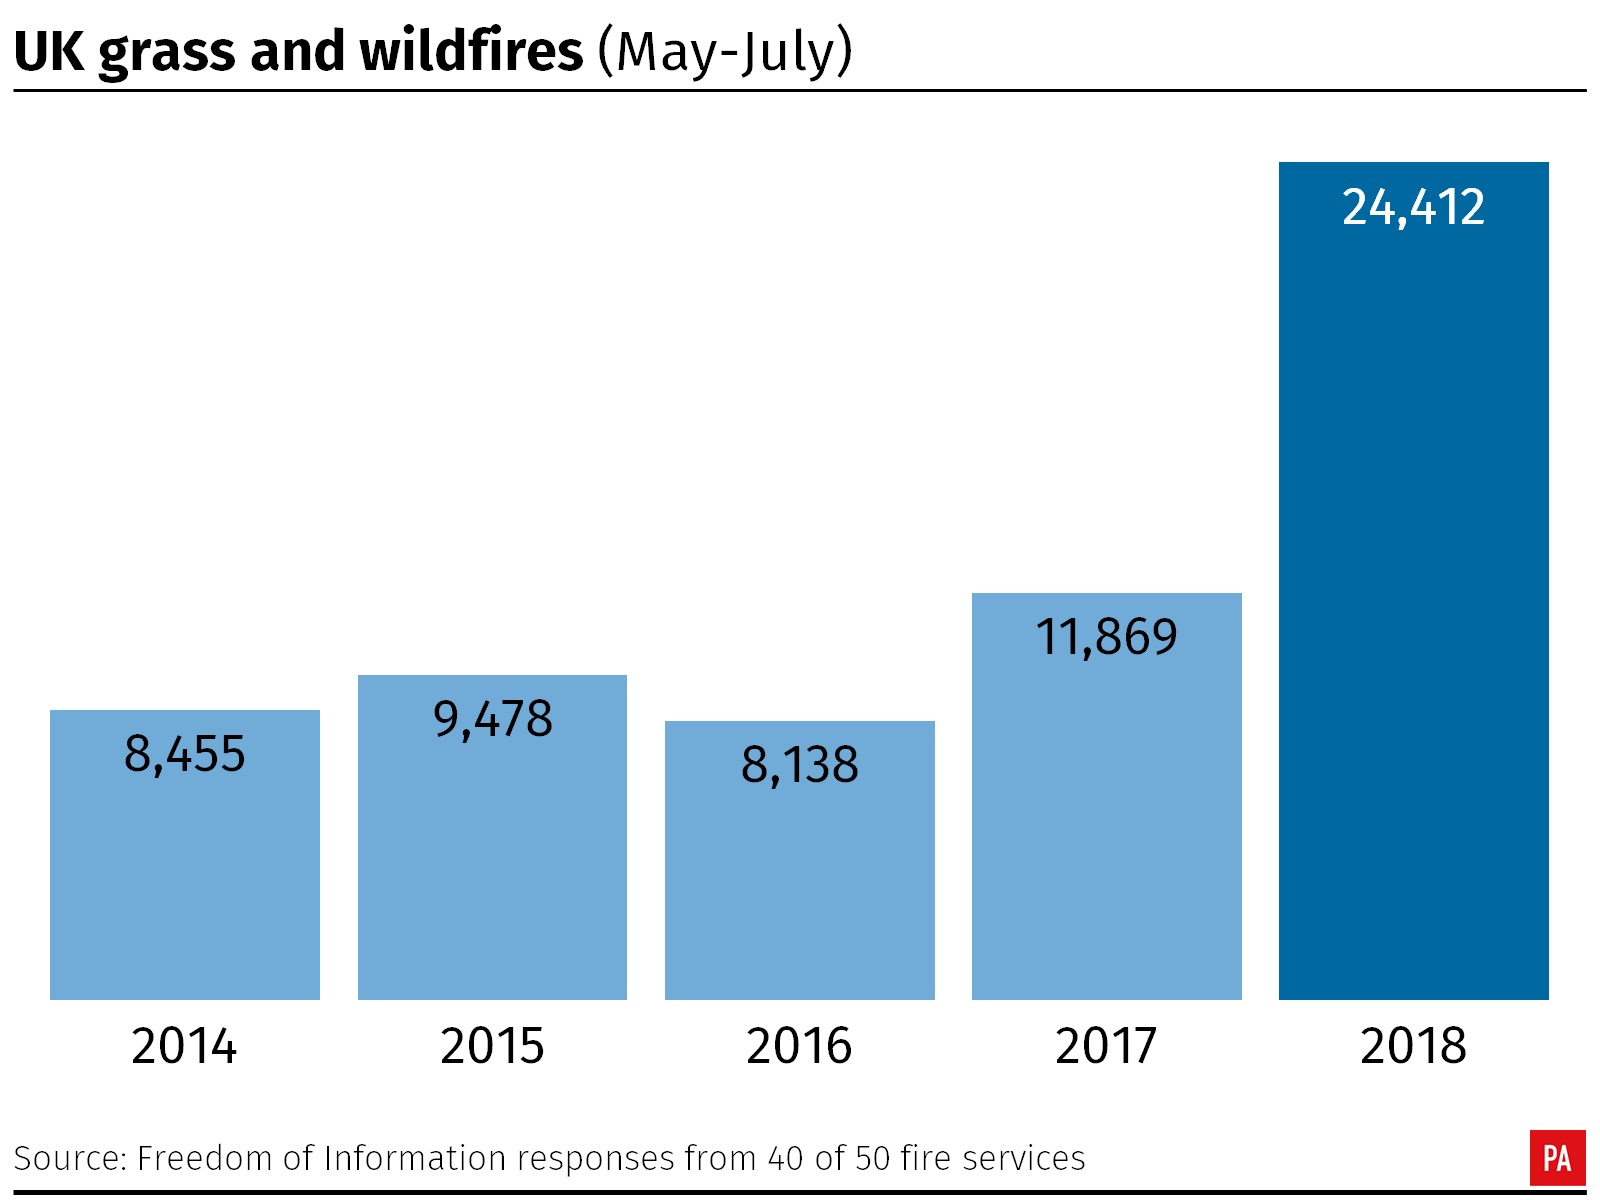 A graph shows the difference between the number of fires in the UK in May, June and July for 2014, 2015, 2016, 2017 and 2018